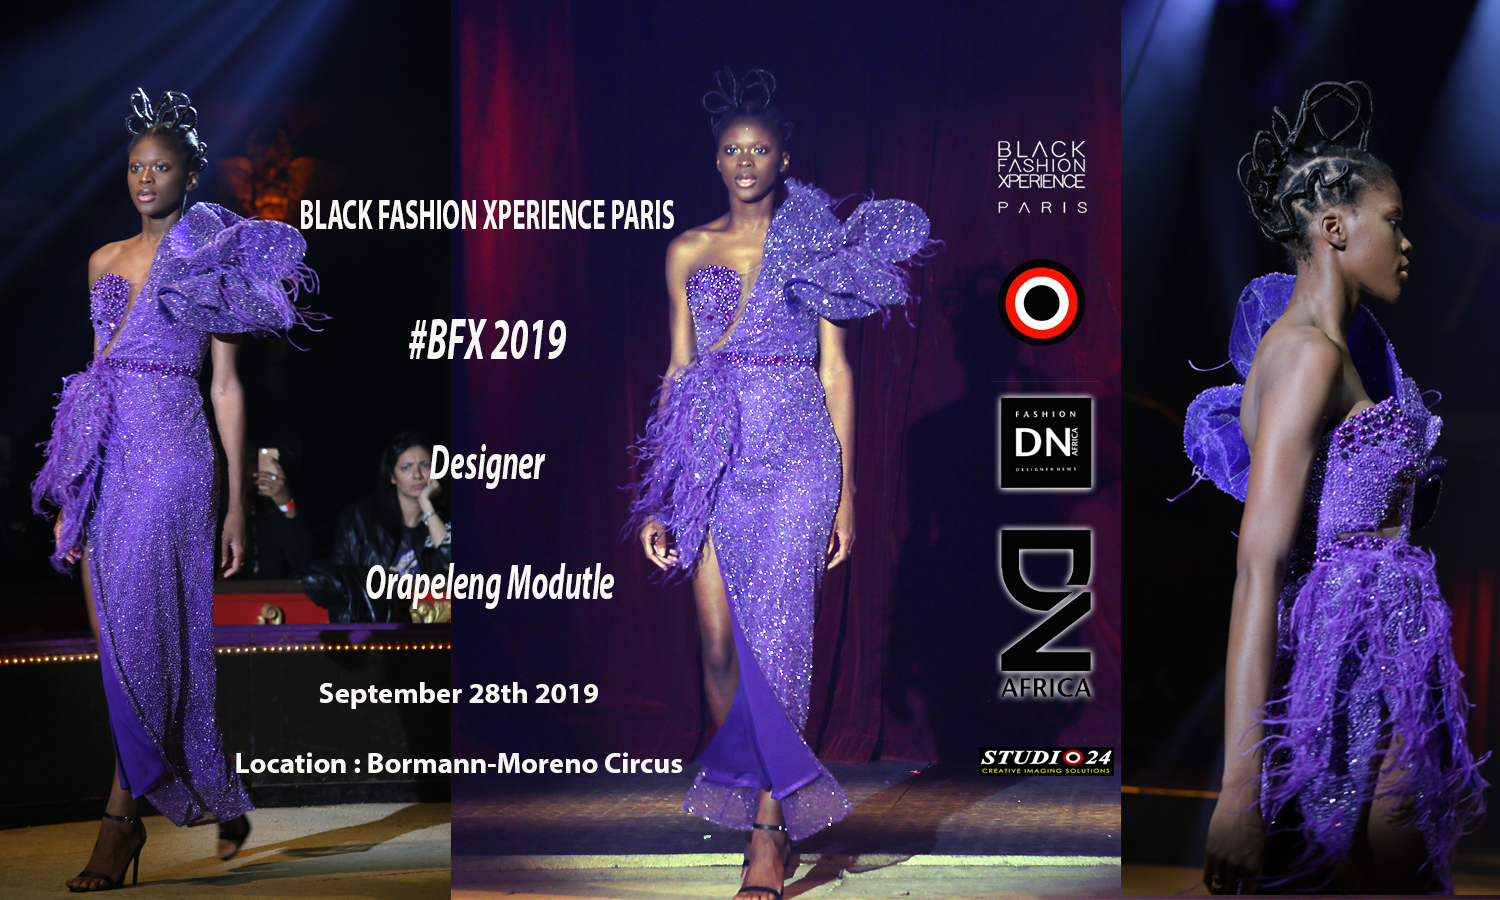 AFRICAN FASHION STYLE MAGAZINE - BFX 2019 – BLACK FASHION XPERIENCE PARIS - BFX 2019 - Orapeleng-Modutle - PR Indirâh Events and Communication - Photographer DAN NGU - Official Media Partner DN AFRICA - STUDIO 24 NIGERIA - STUDIO 24 INTERNATIONAL - Ifeanyi Christopher Oputa MD AND CEO OF COLVI LIMITED AND STUDIO 24 - CHEVEUX CHERIE and CHEVEUX CHERIE STUDIO BY MARIEME DUBOZ- Fashion Editor Nahomie NOOR COULIBALY